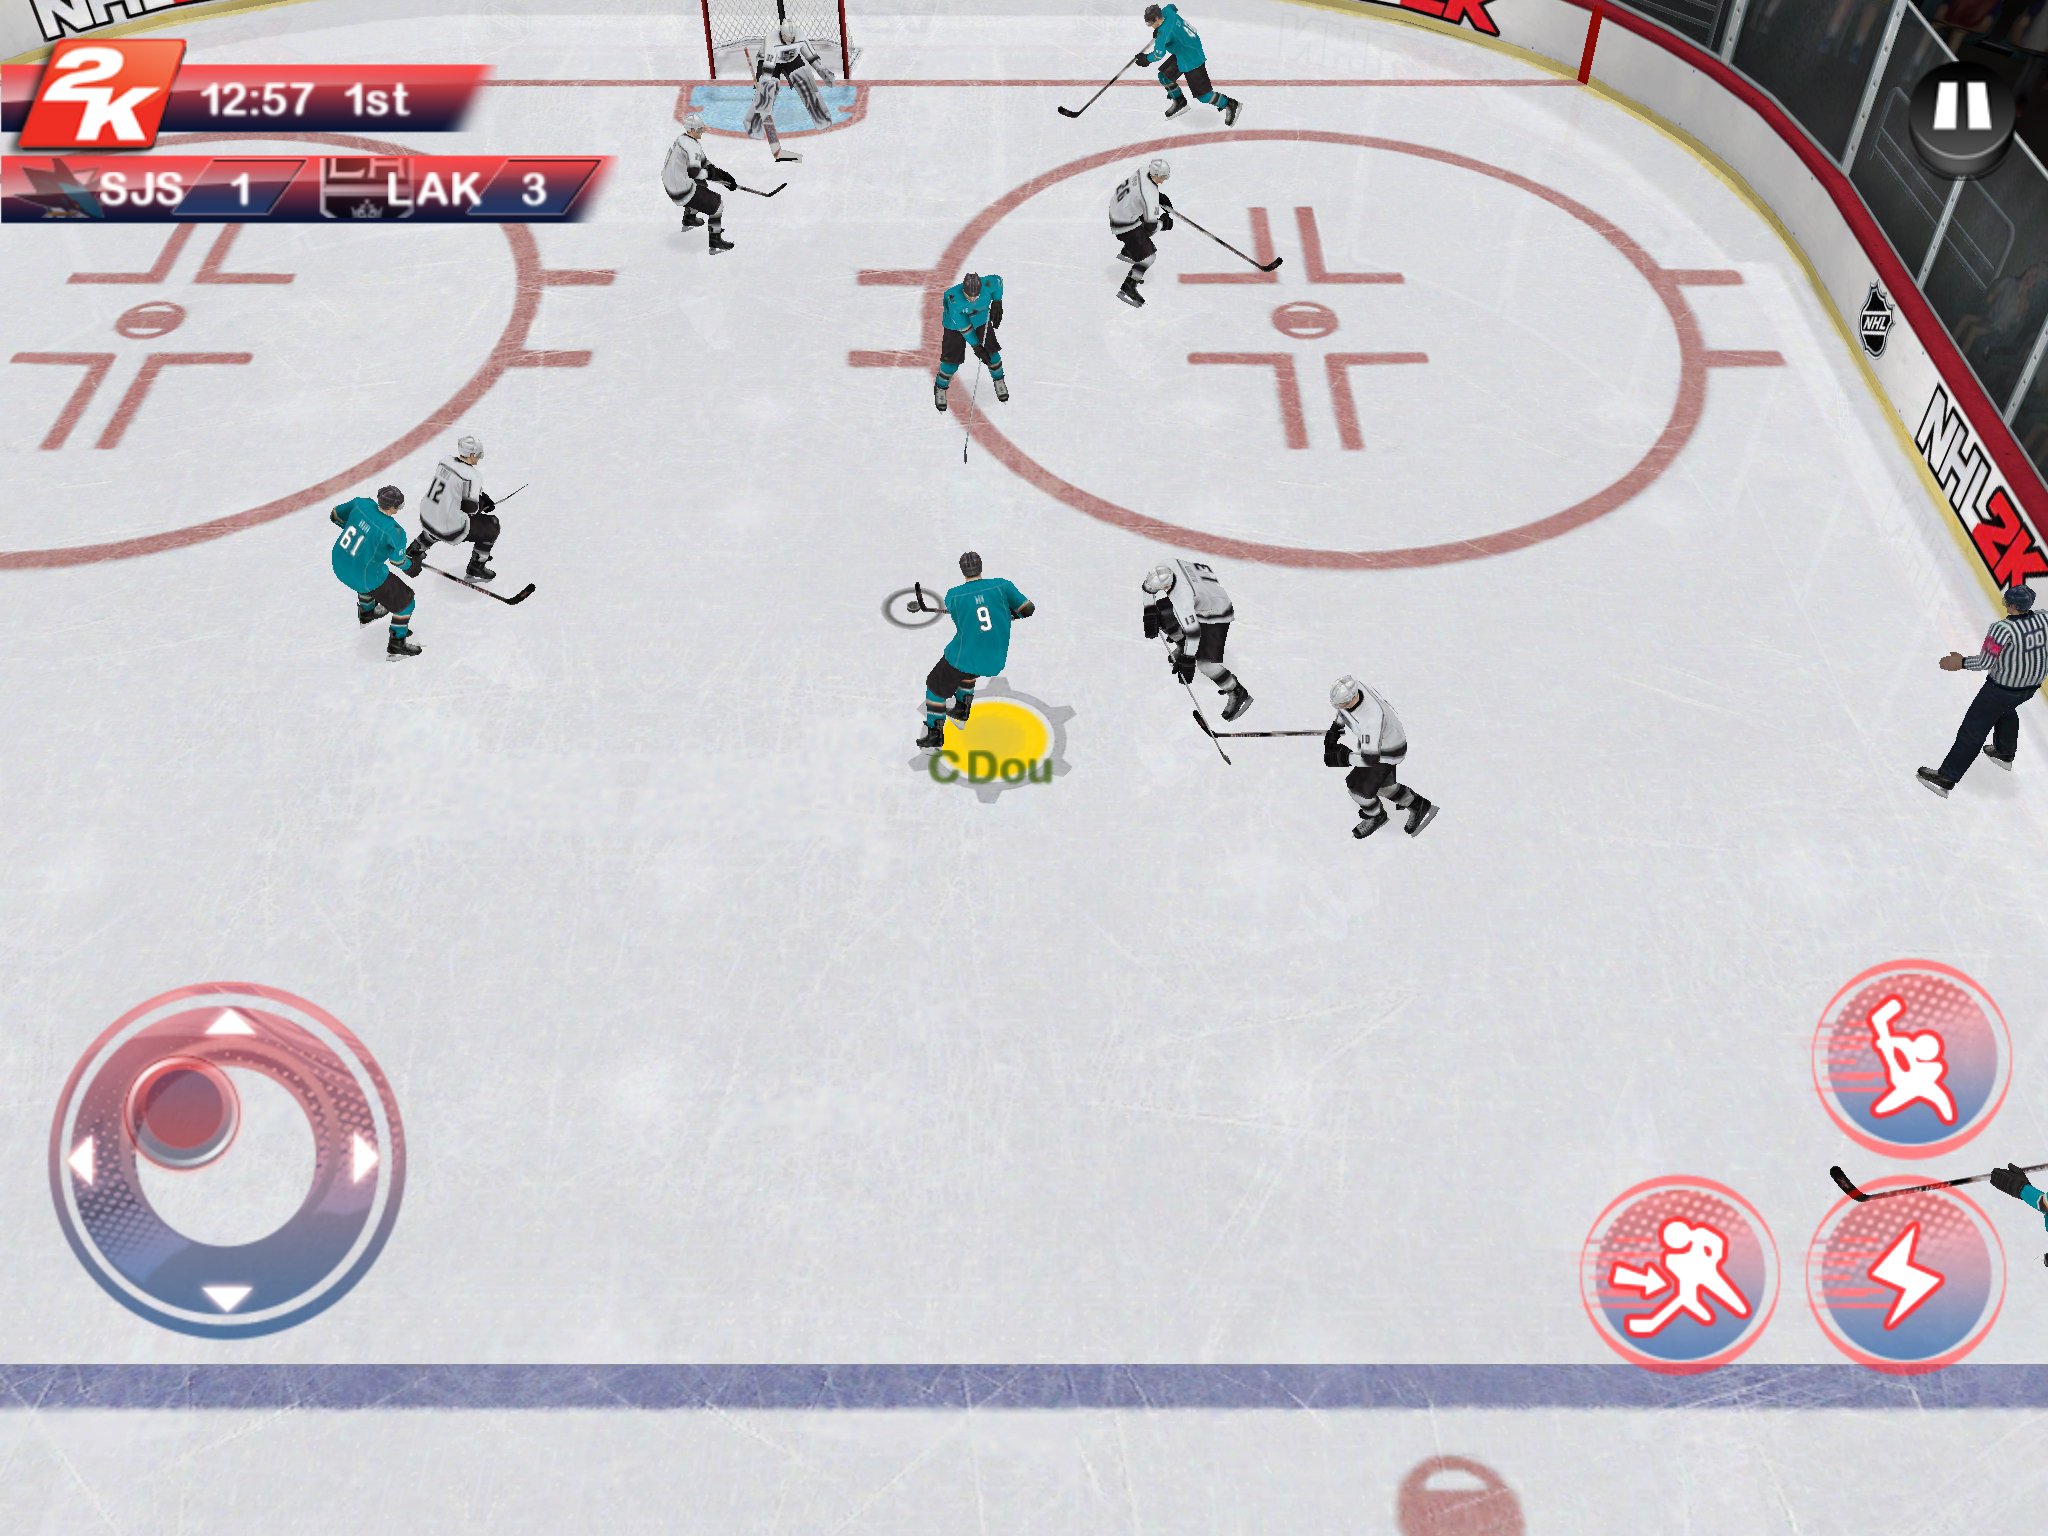 2K announces new NHL game for mobile 